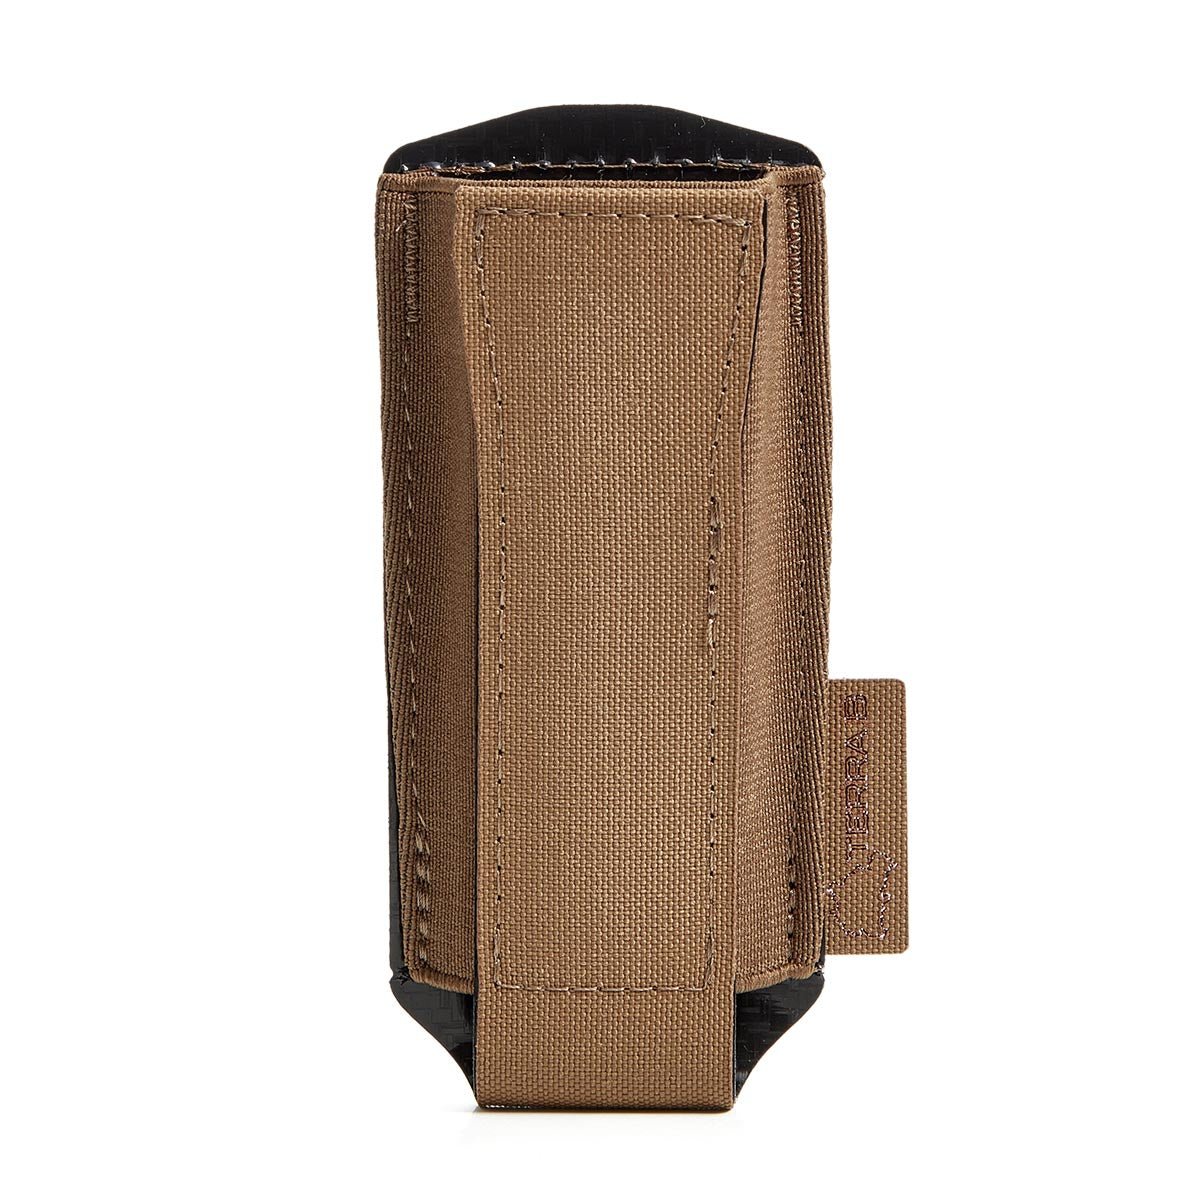 TERRA B Mag Pouch Small - Coyote Brown